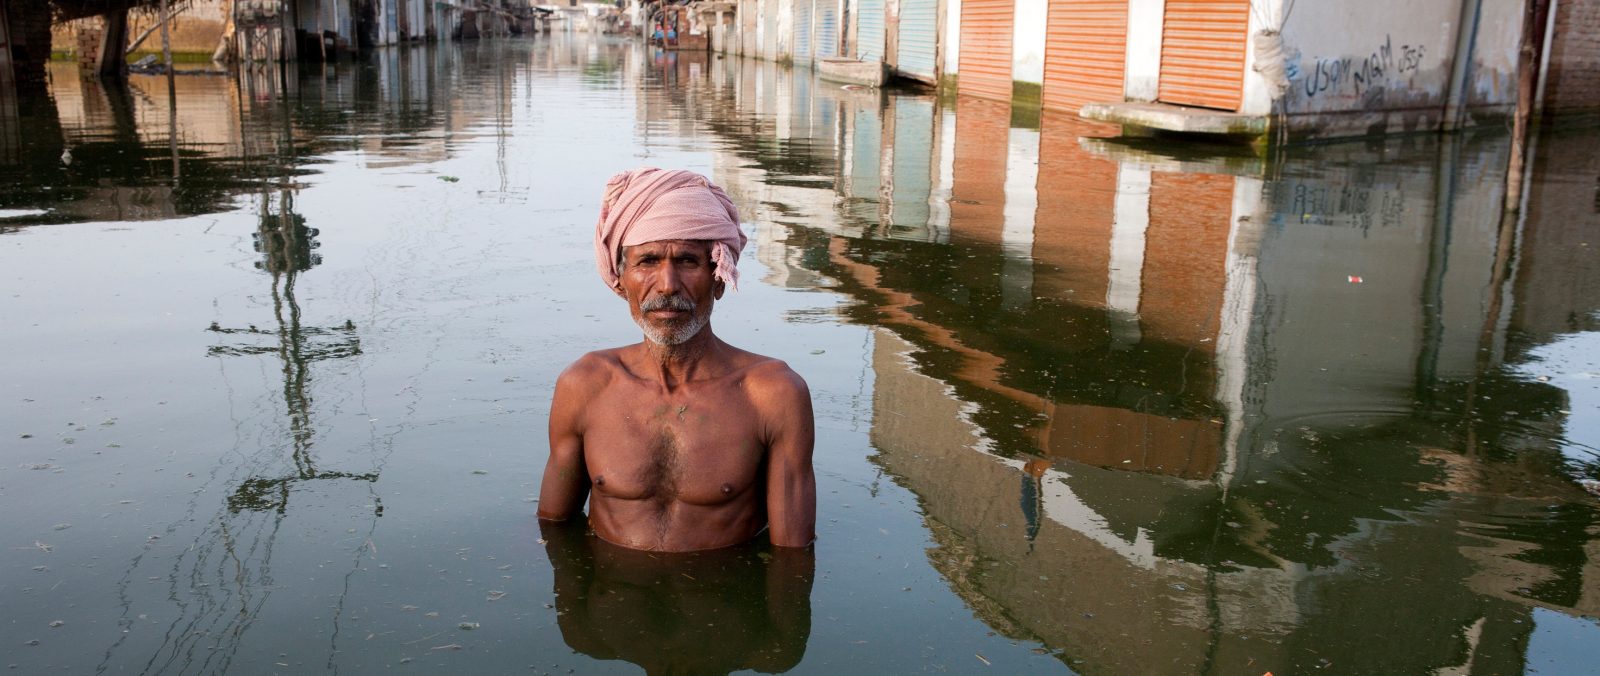 A man stands chest-deep in flood waters in Pakistan